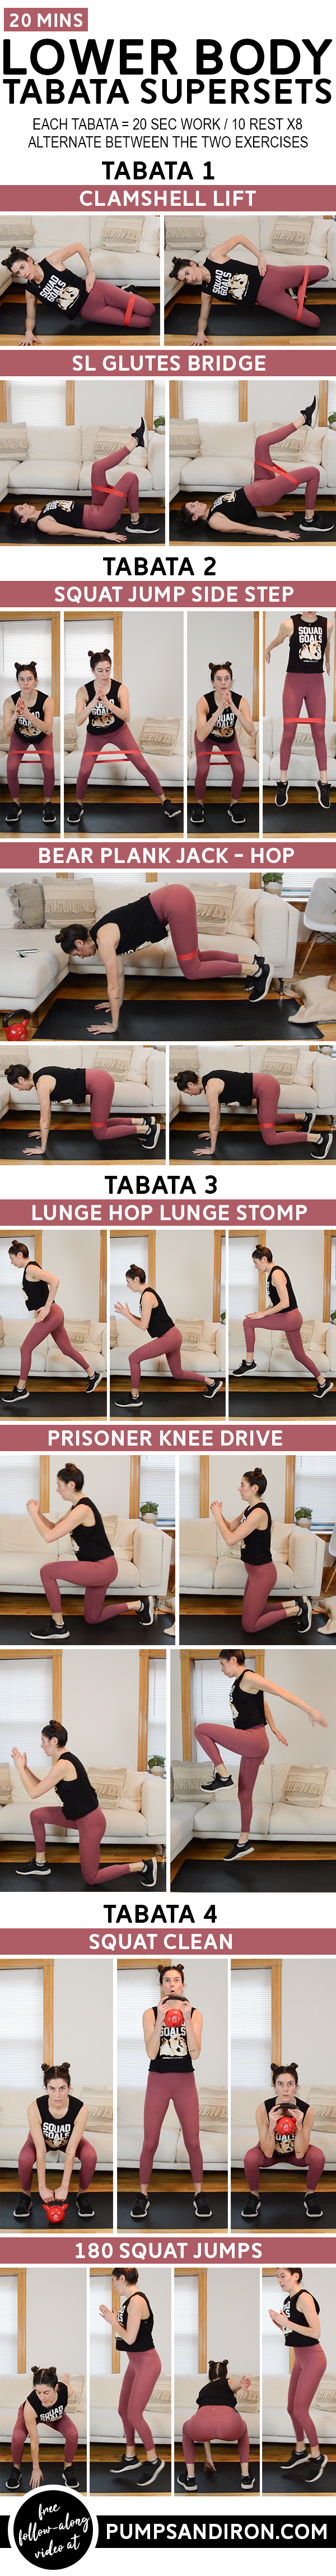 Lower Body Tabata Superset Workout (20 Mins) - This workout will target legs & glutes and is broken up into four tabatas. Video included! #lowerbodyworkout #legday #tabata #hiit #workout #workoutvideo